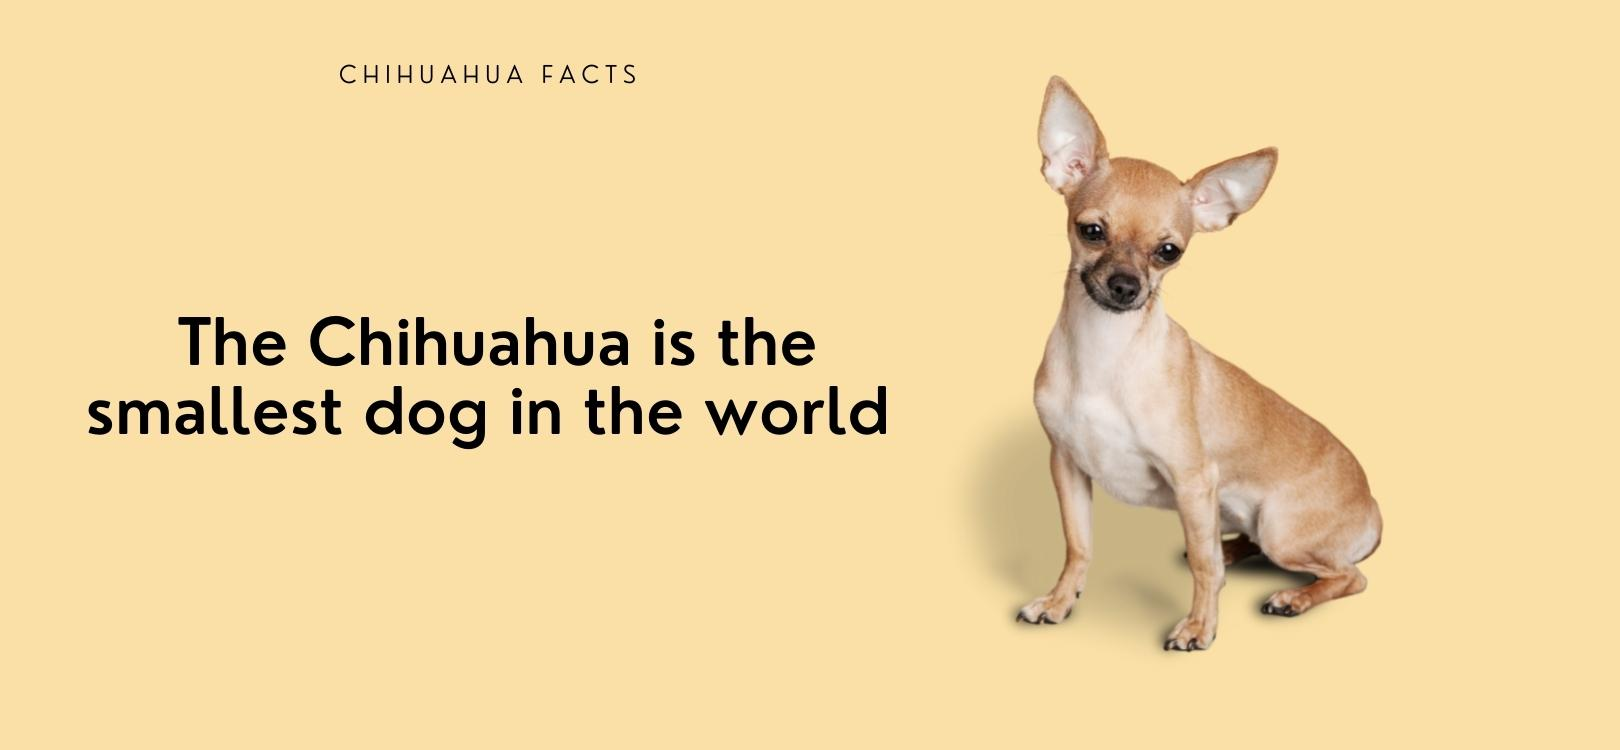 chihuahua smallest dog in the world